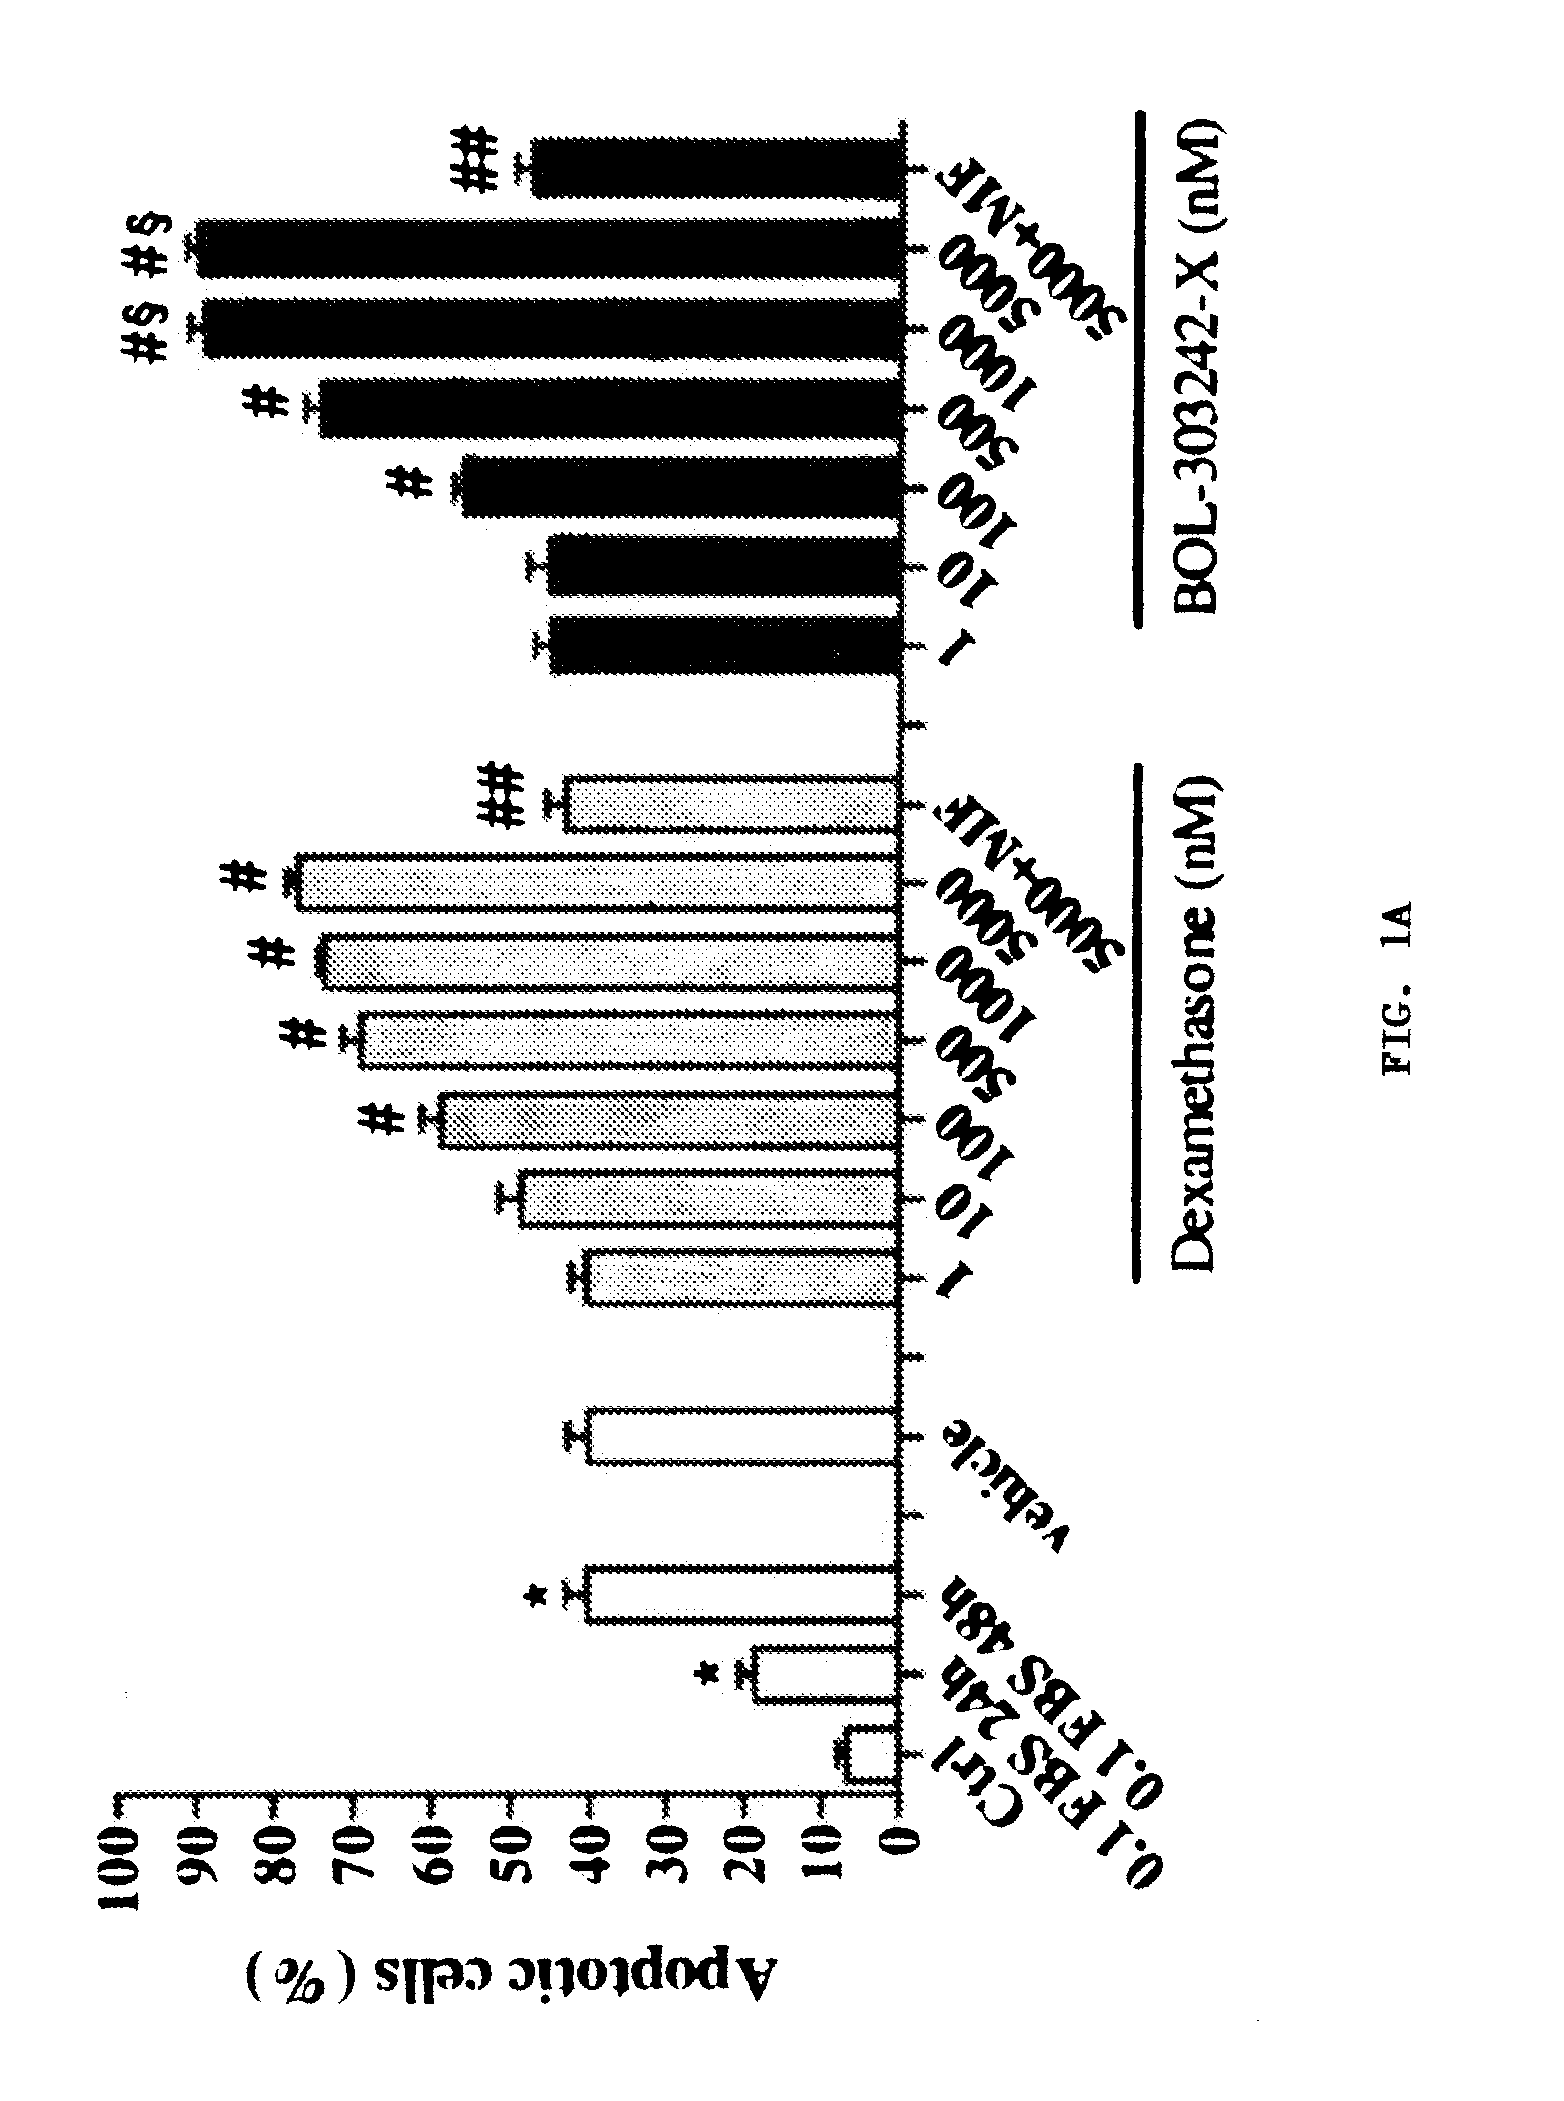 Compositions and Methods for Treating, Controlling, Reducing, Ameliorating, or Preventing Allergy